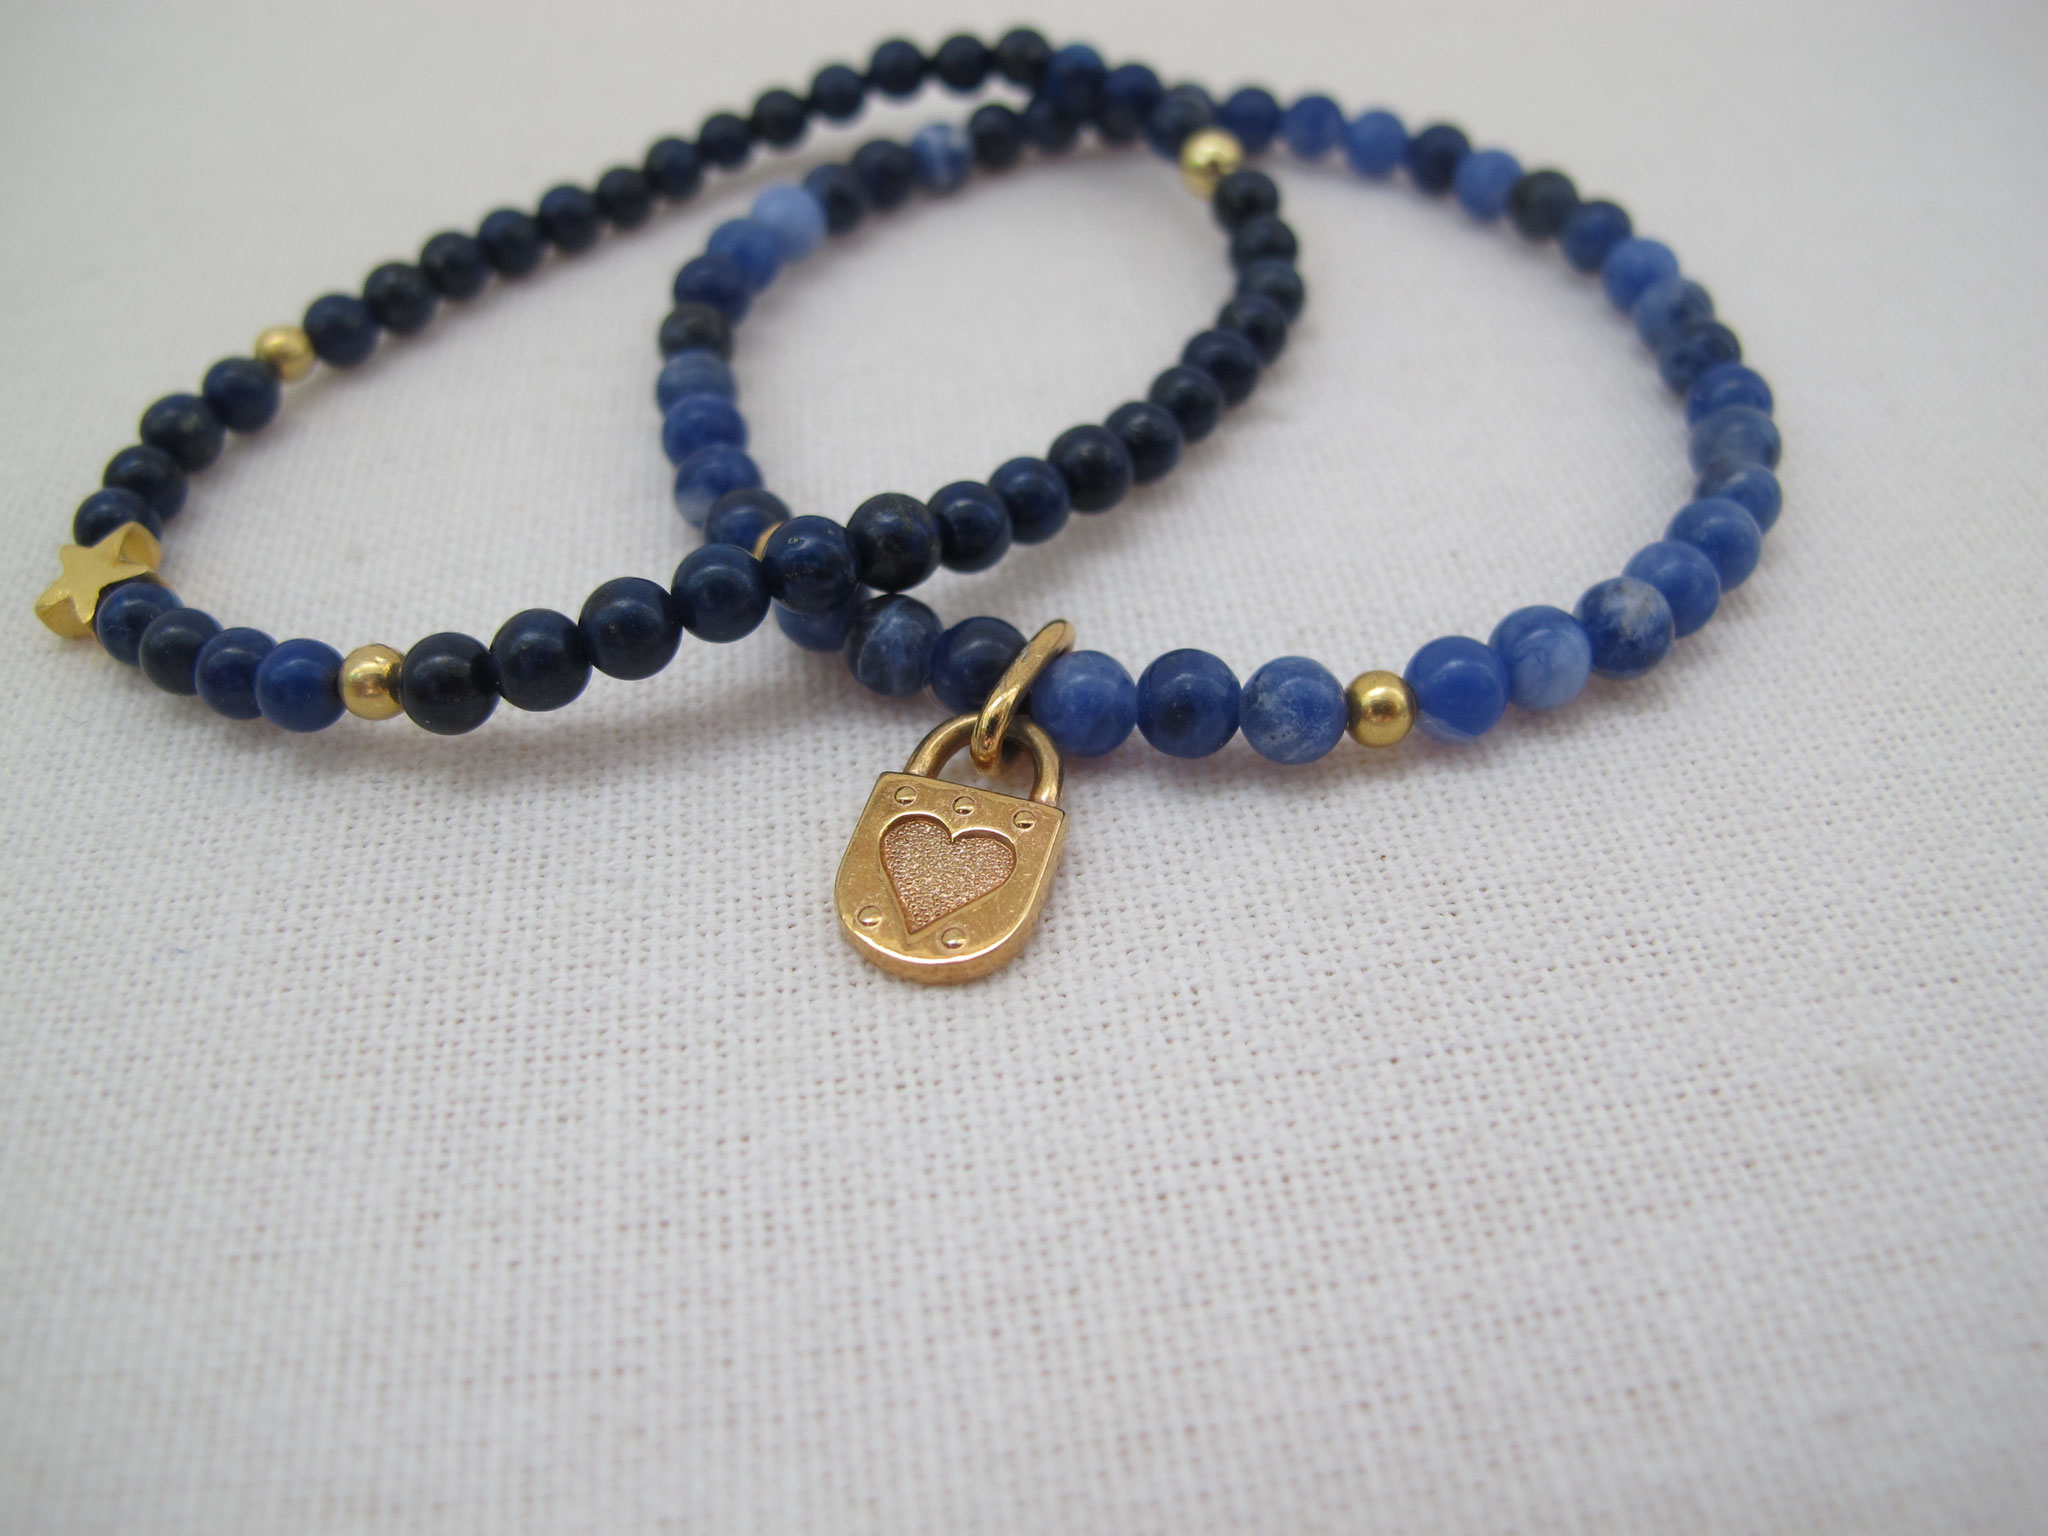 Does this sodalite hold the key to your heart? Sodalite with gold-plated elements and charm (sold)